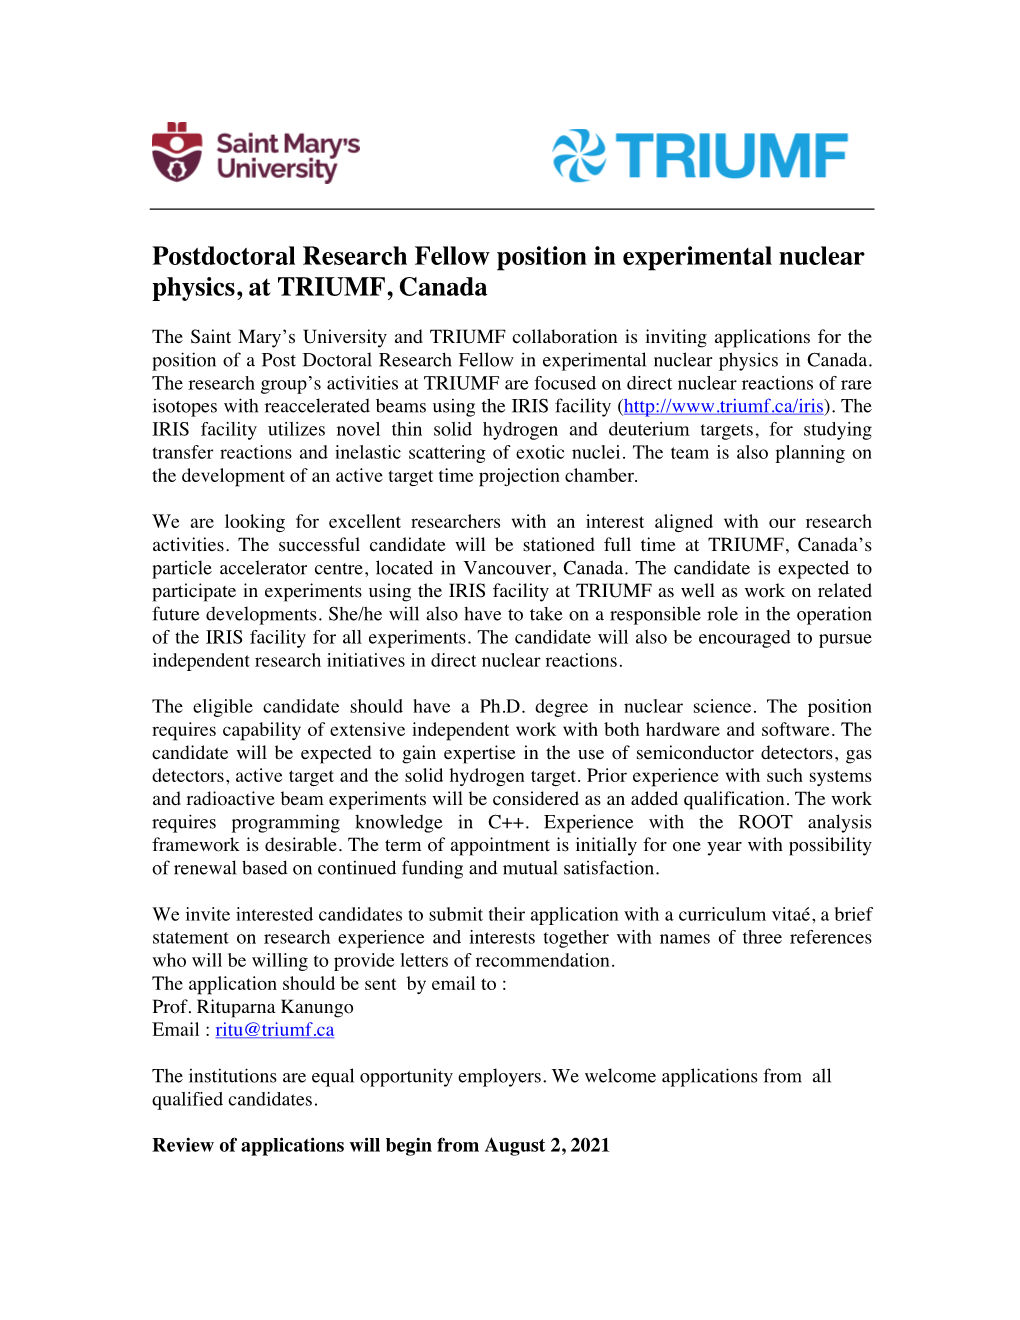 Postdoctoral Research Fellow Position in Experimental Nuclear Physics, at TRIUMF, Canada